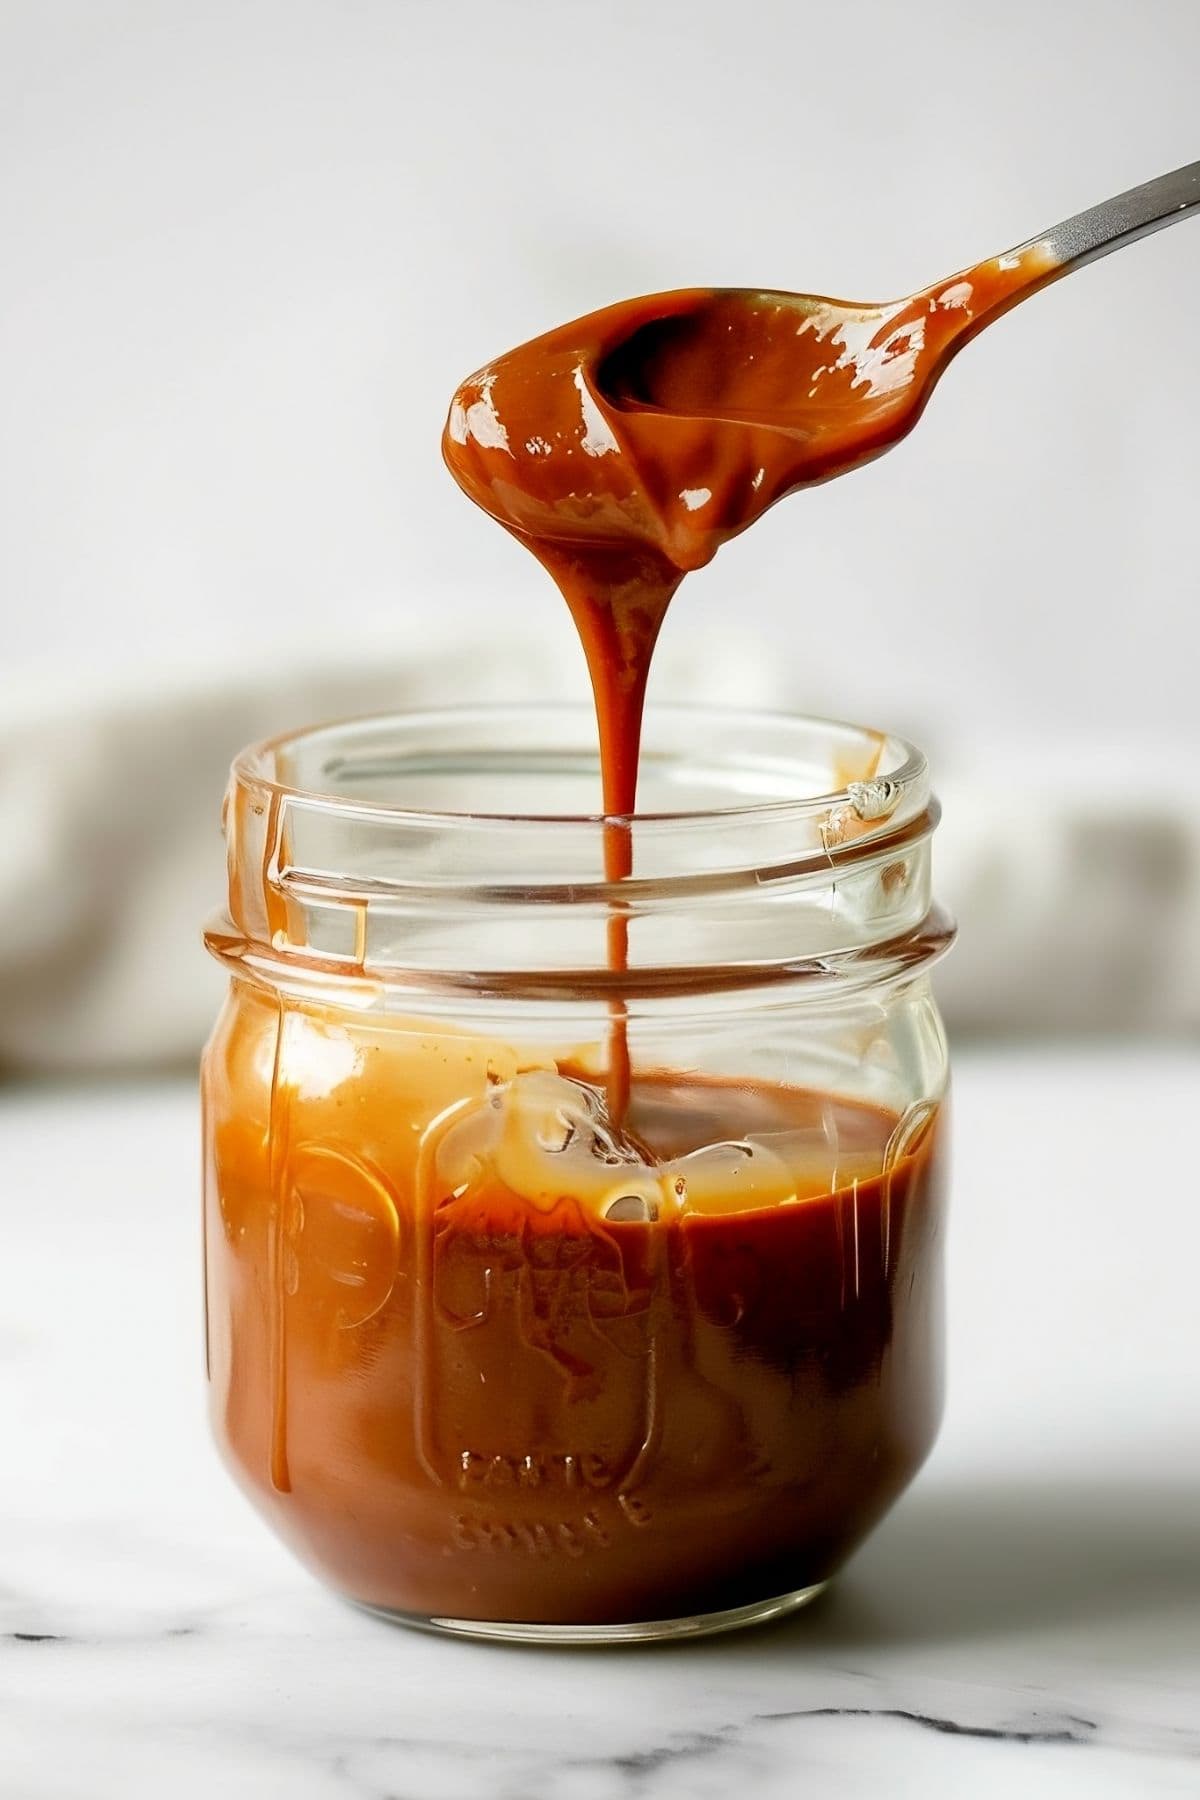 Jar of Salted Caramel with a Spoon Dripping Caramel on a White Marble Table